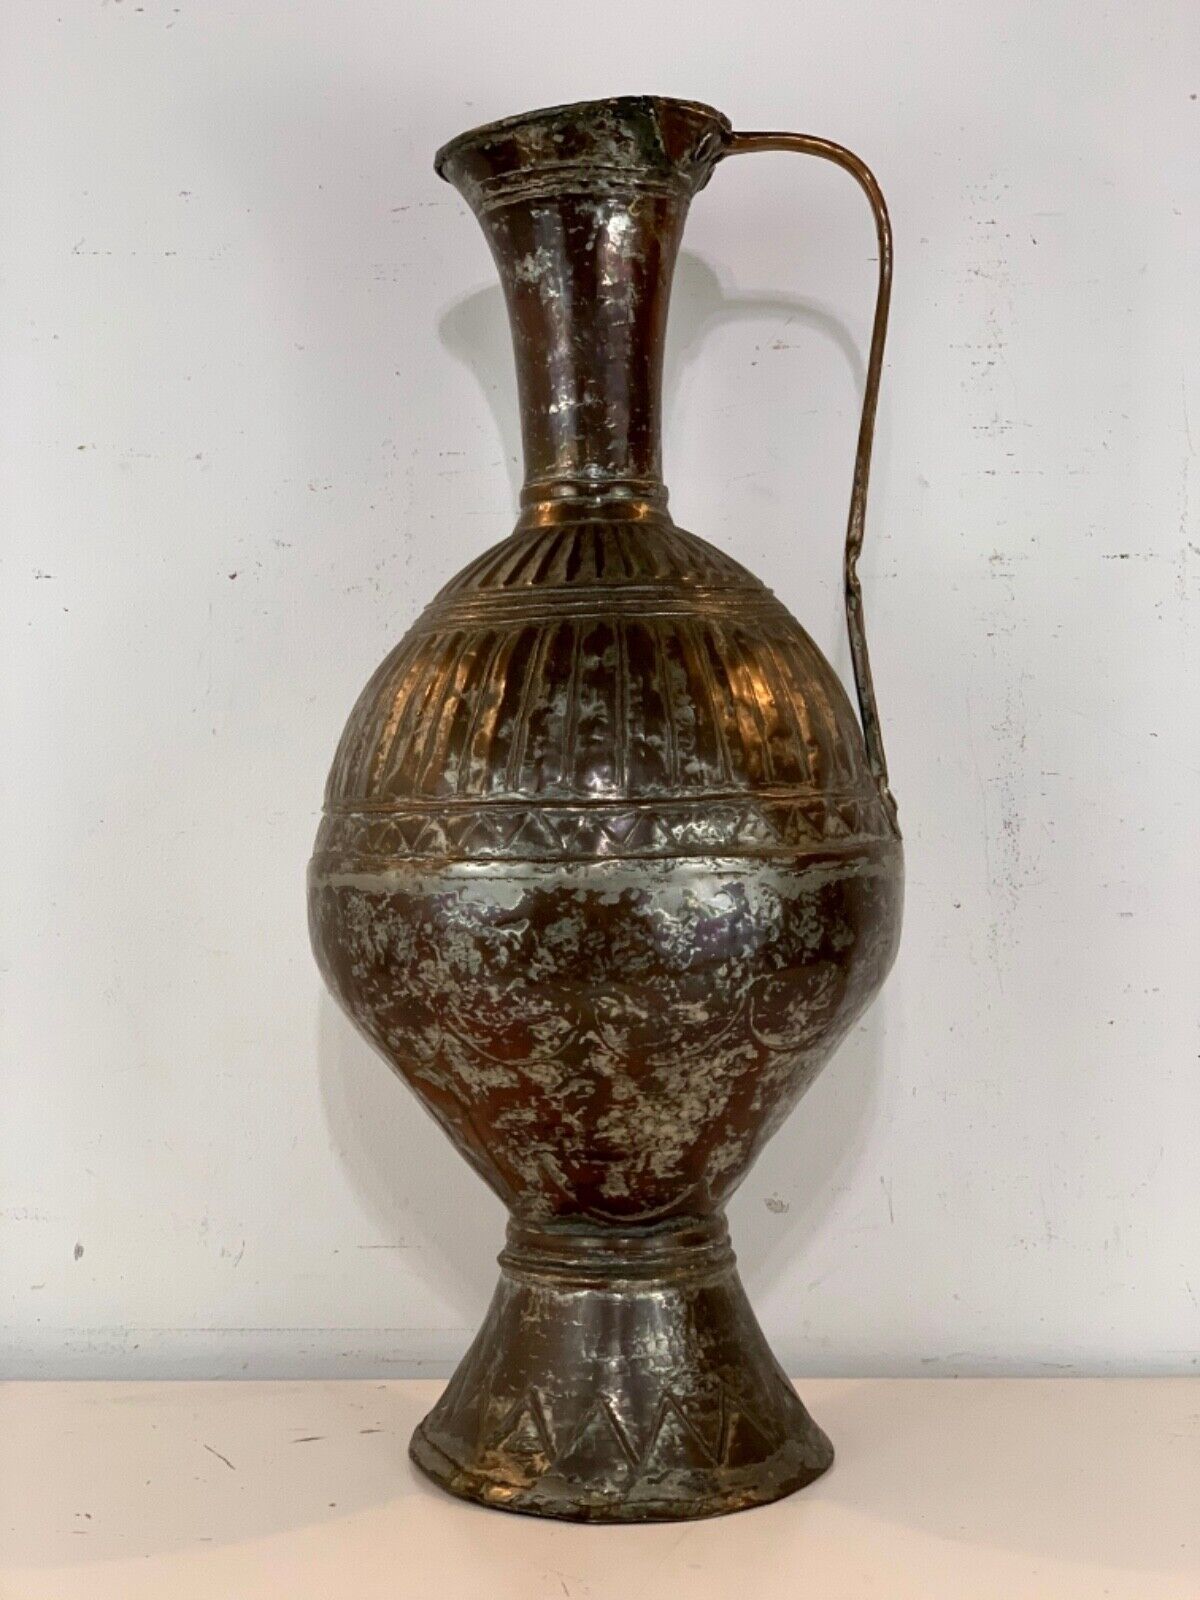 Antique Persian Large Lidded Ewer / Pitcher with Handle and Copper Finish